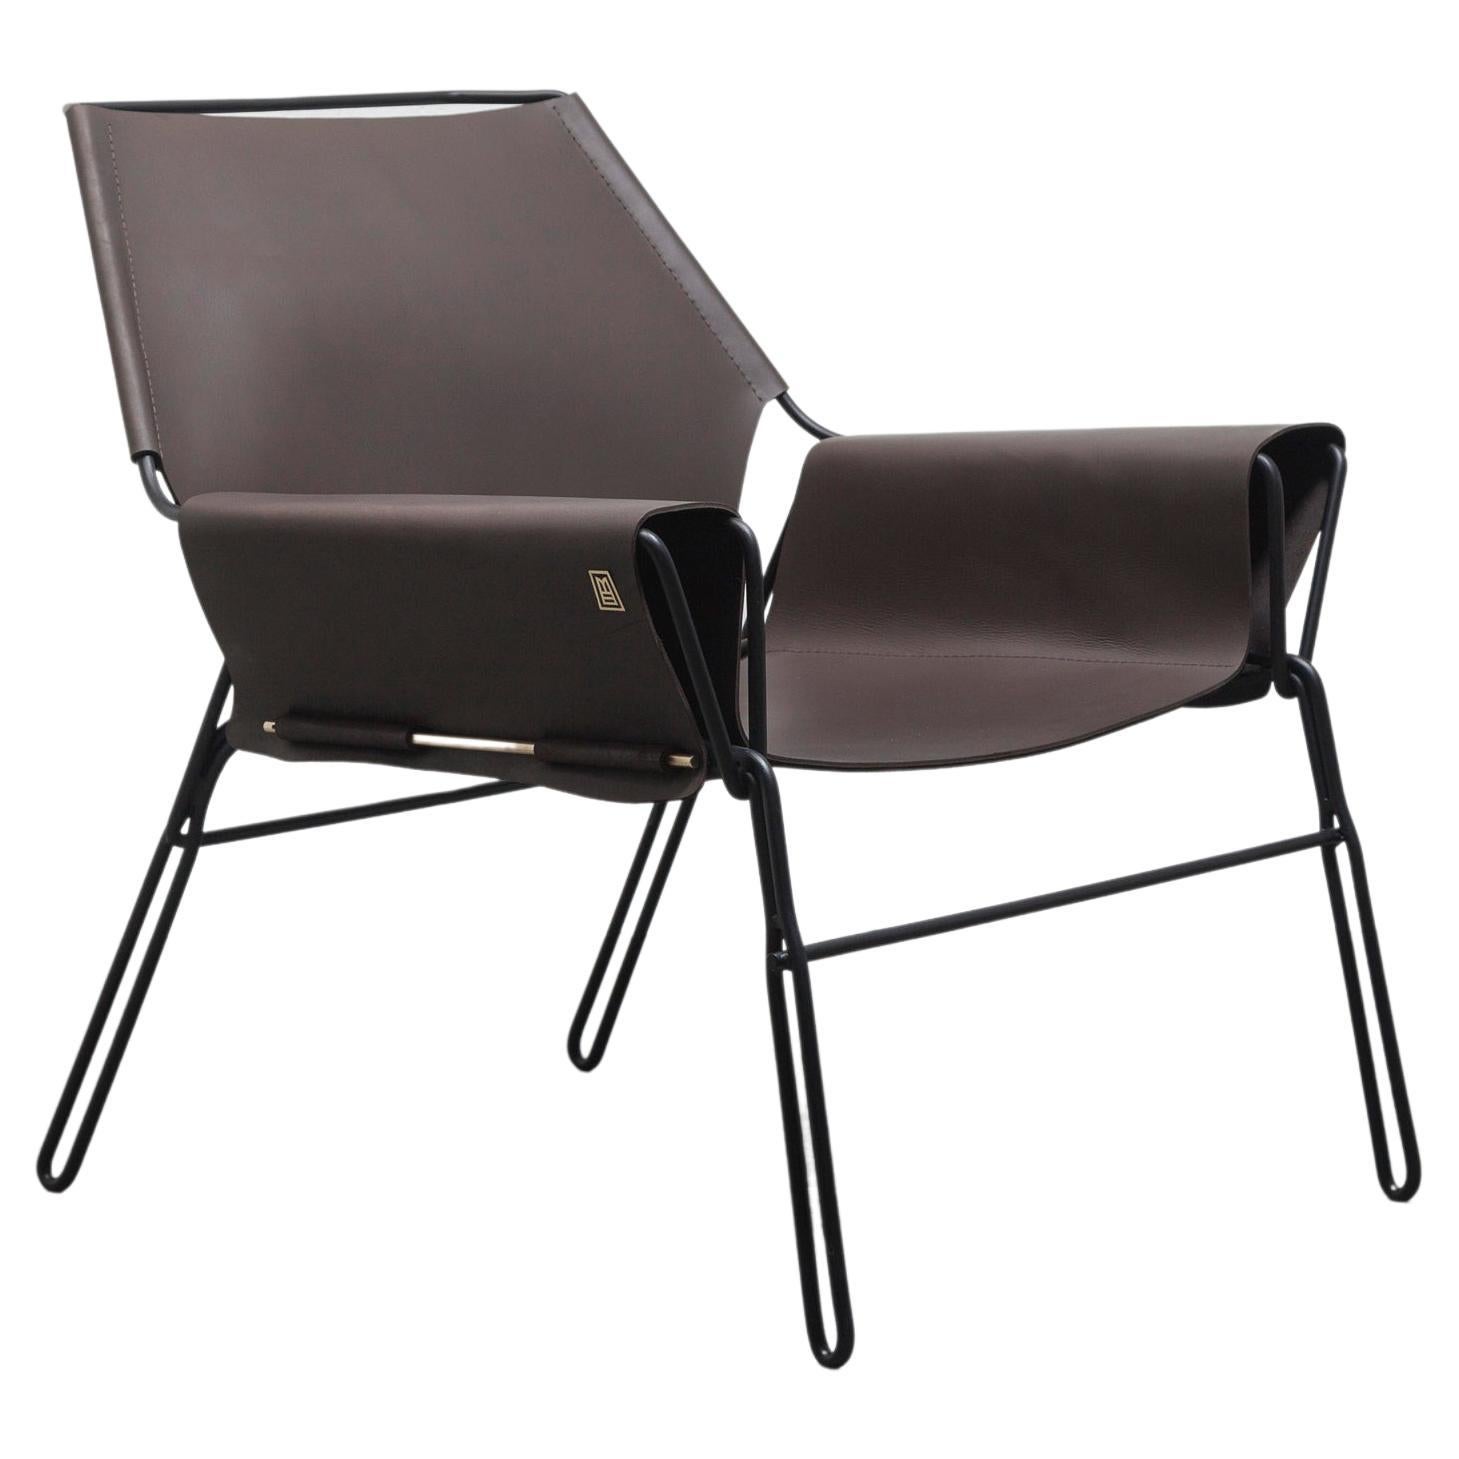 PERFIDIA_02 Brown Thick Leather Sling Lounge Chair in Black Steel by ANDEAN